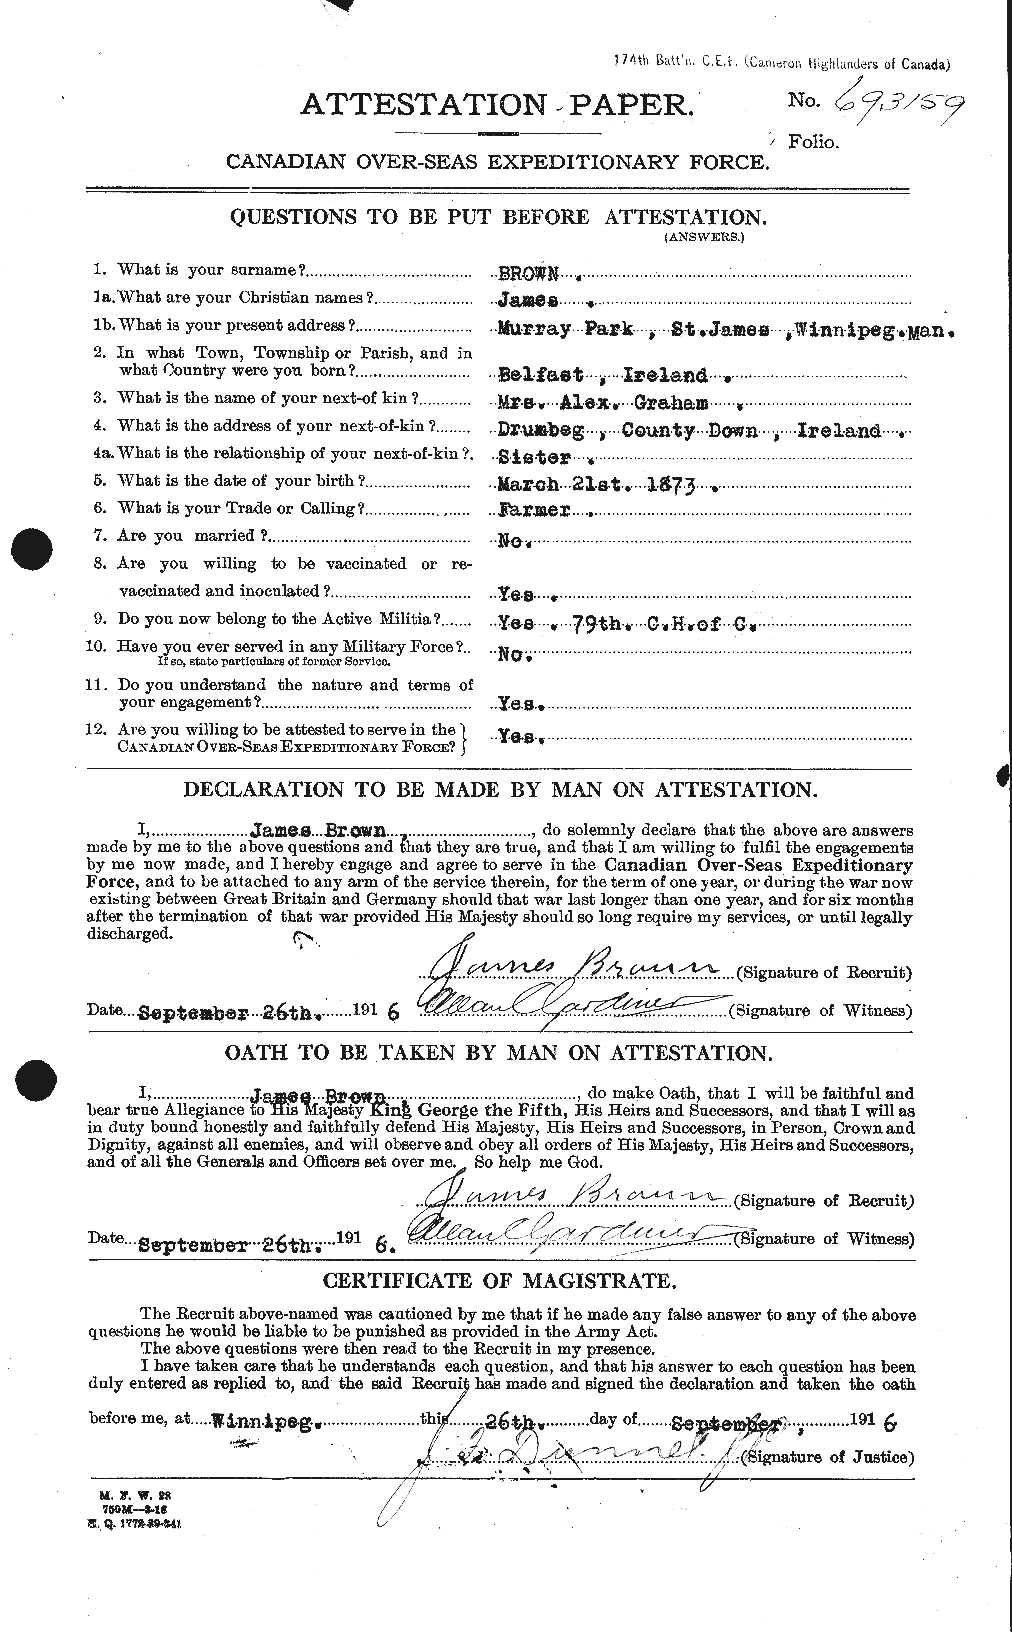 Personnel Records of the First World War - CEF 265743a